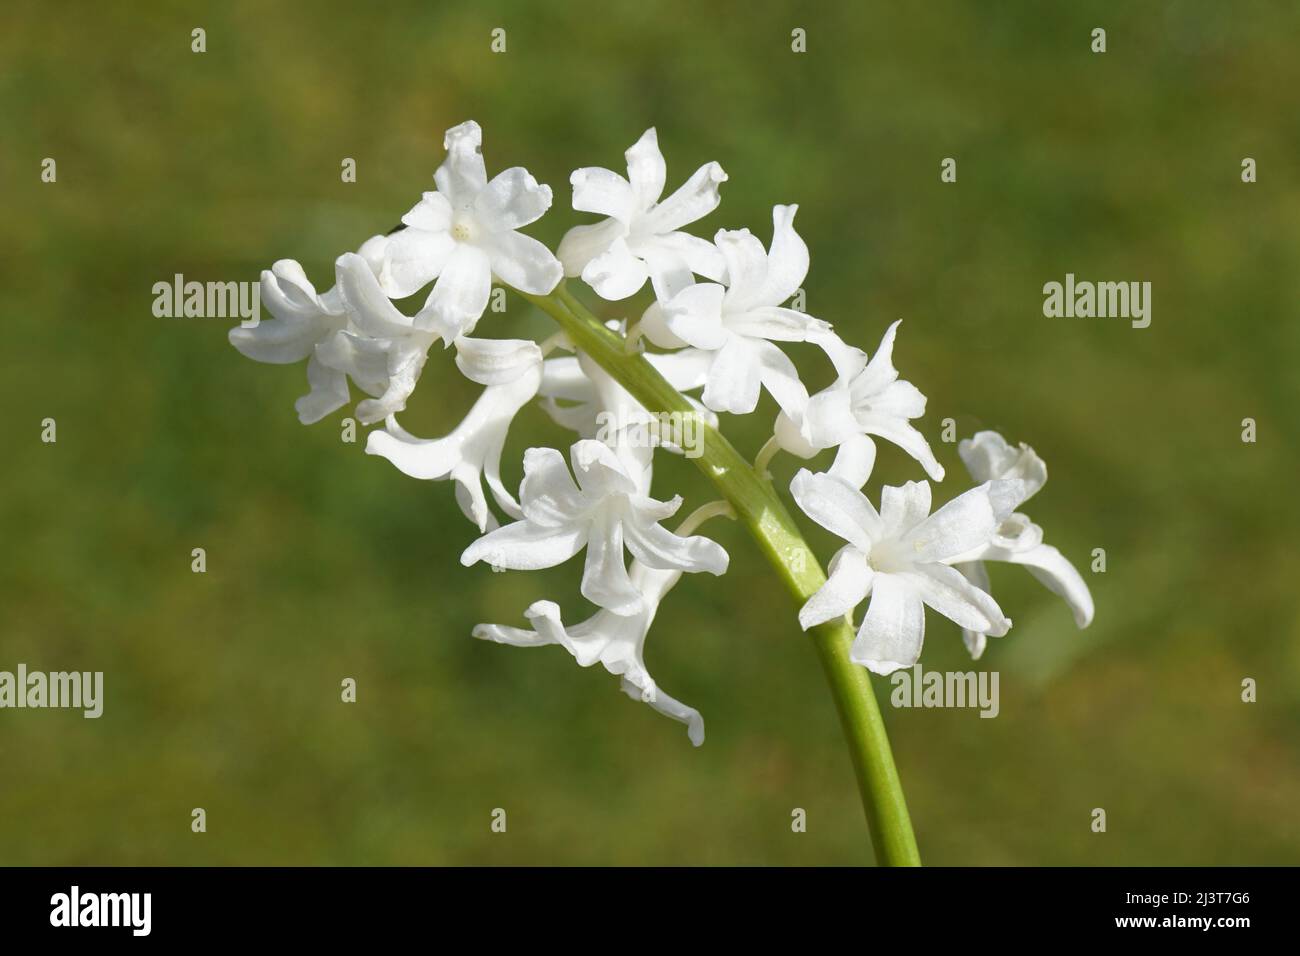 Close up White Common Hyacinth, Garden Hyacinth (Hyacinthus orientalis), Subfamily Scilloideae, Family Asparagaceae. Blurred green garden Stock Photo